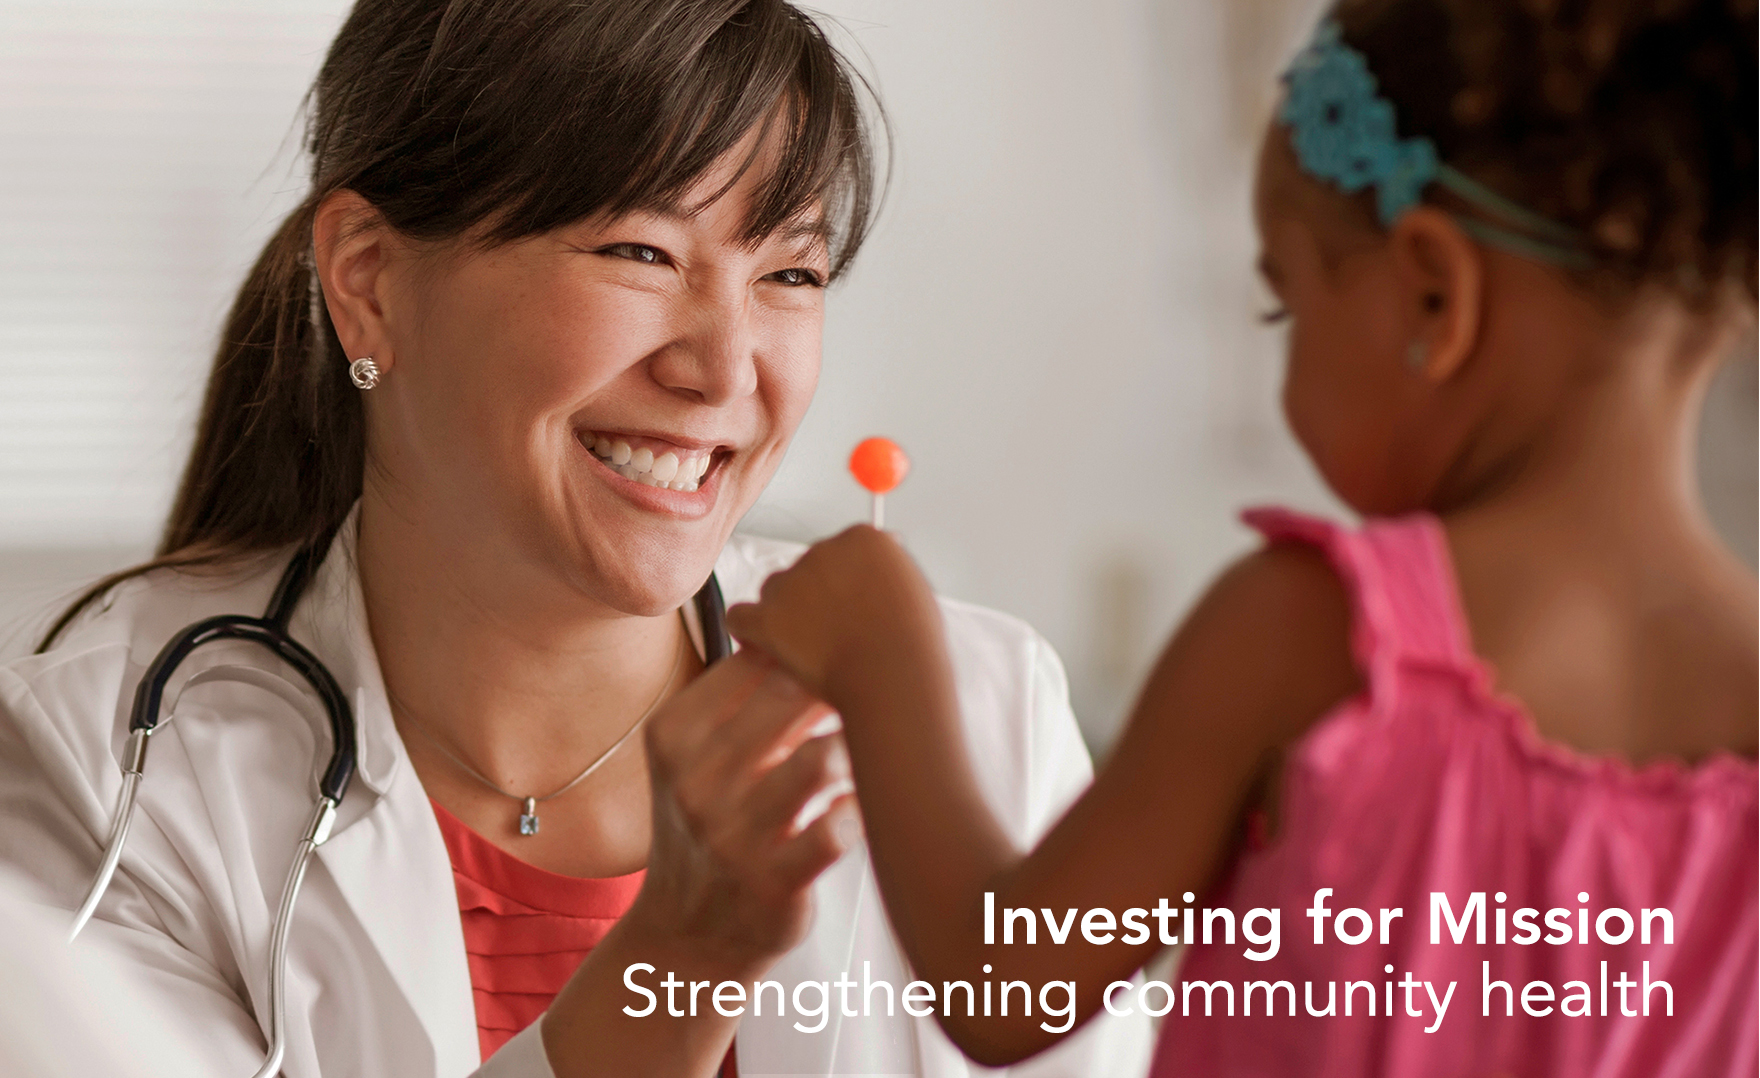 Investing for Mission | Strengthening community health